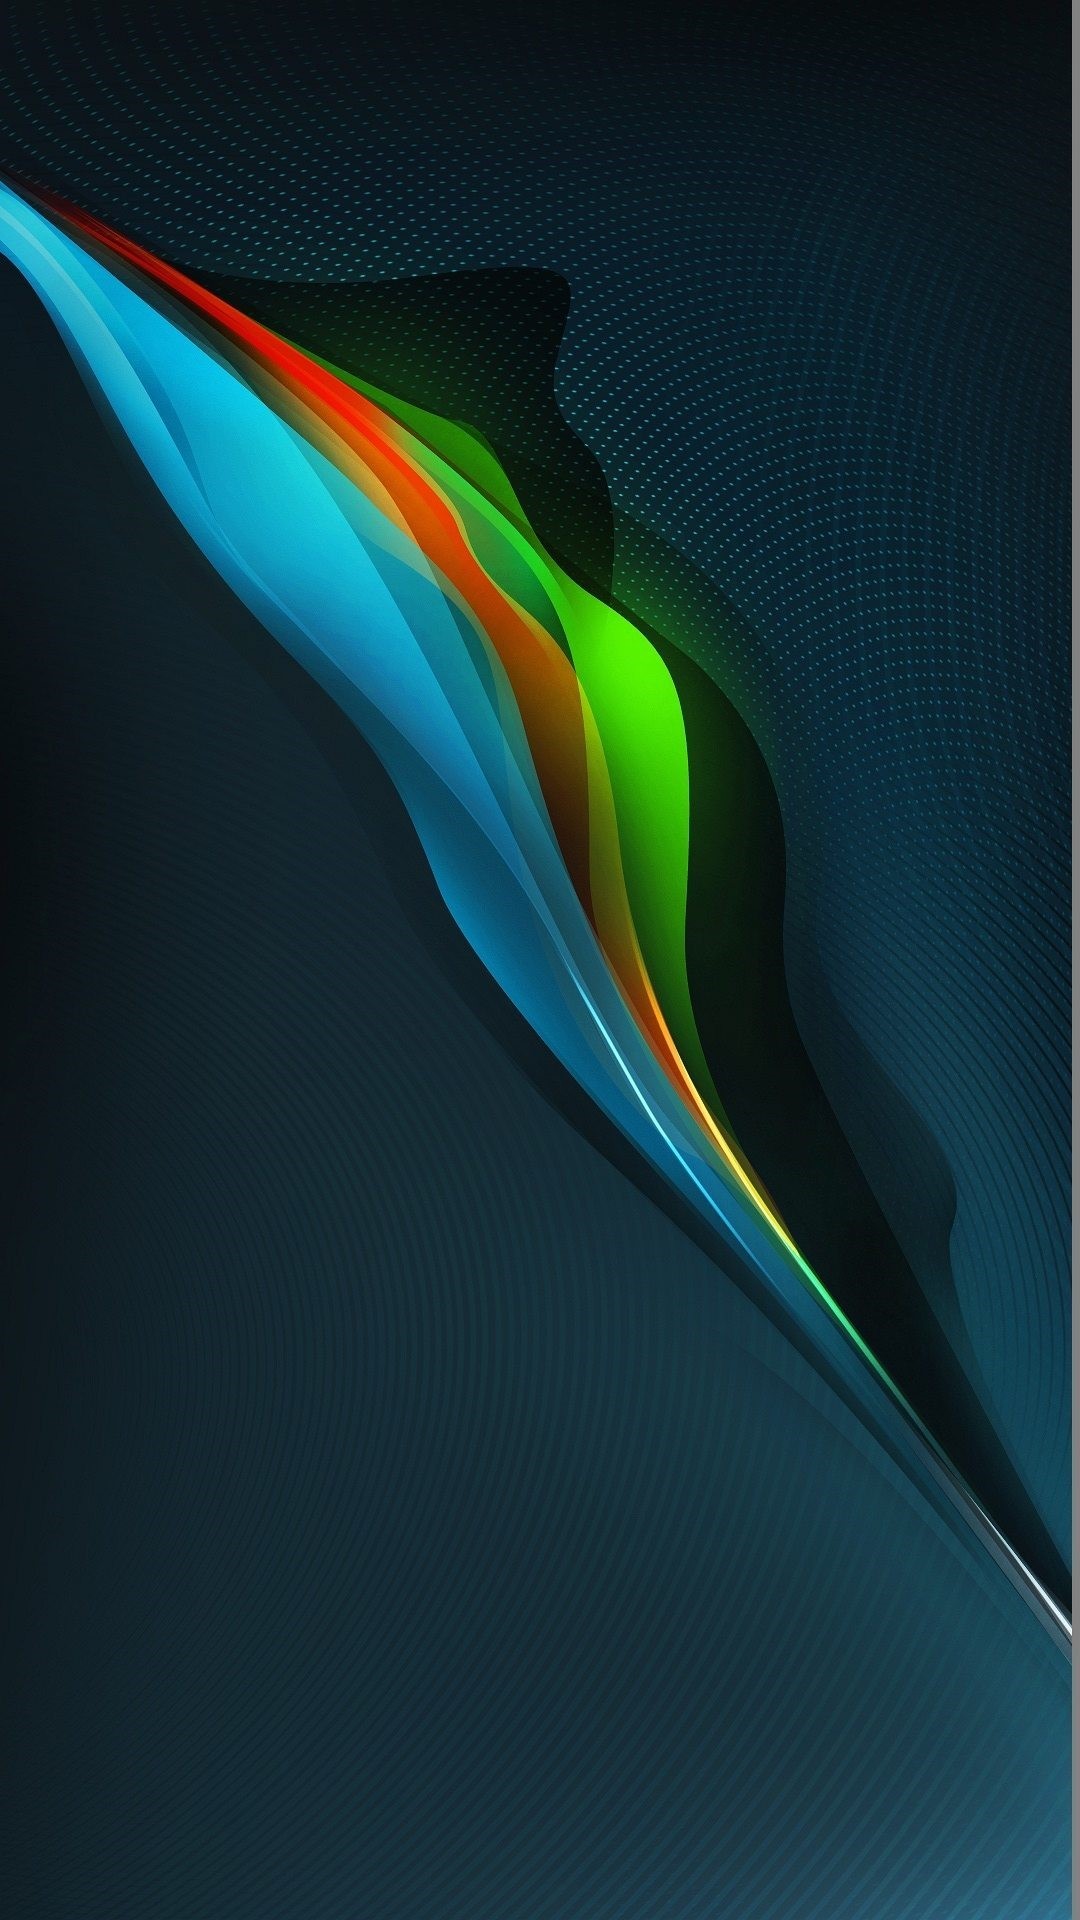 1080x1920 Phone wallpapers hd abstract awesome.